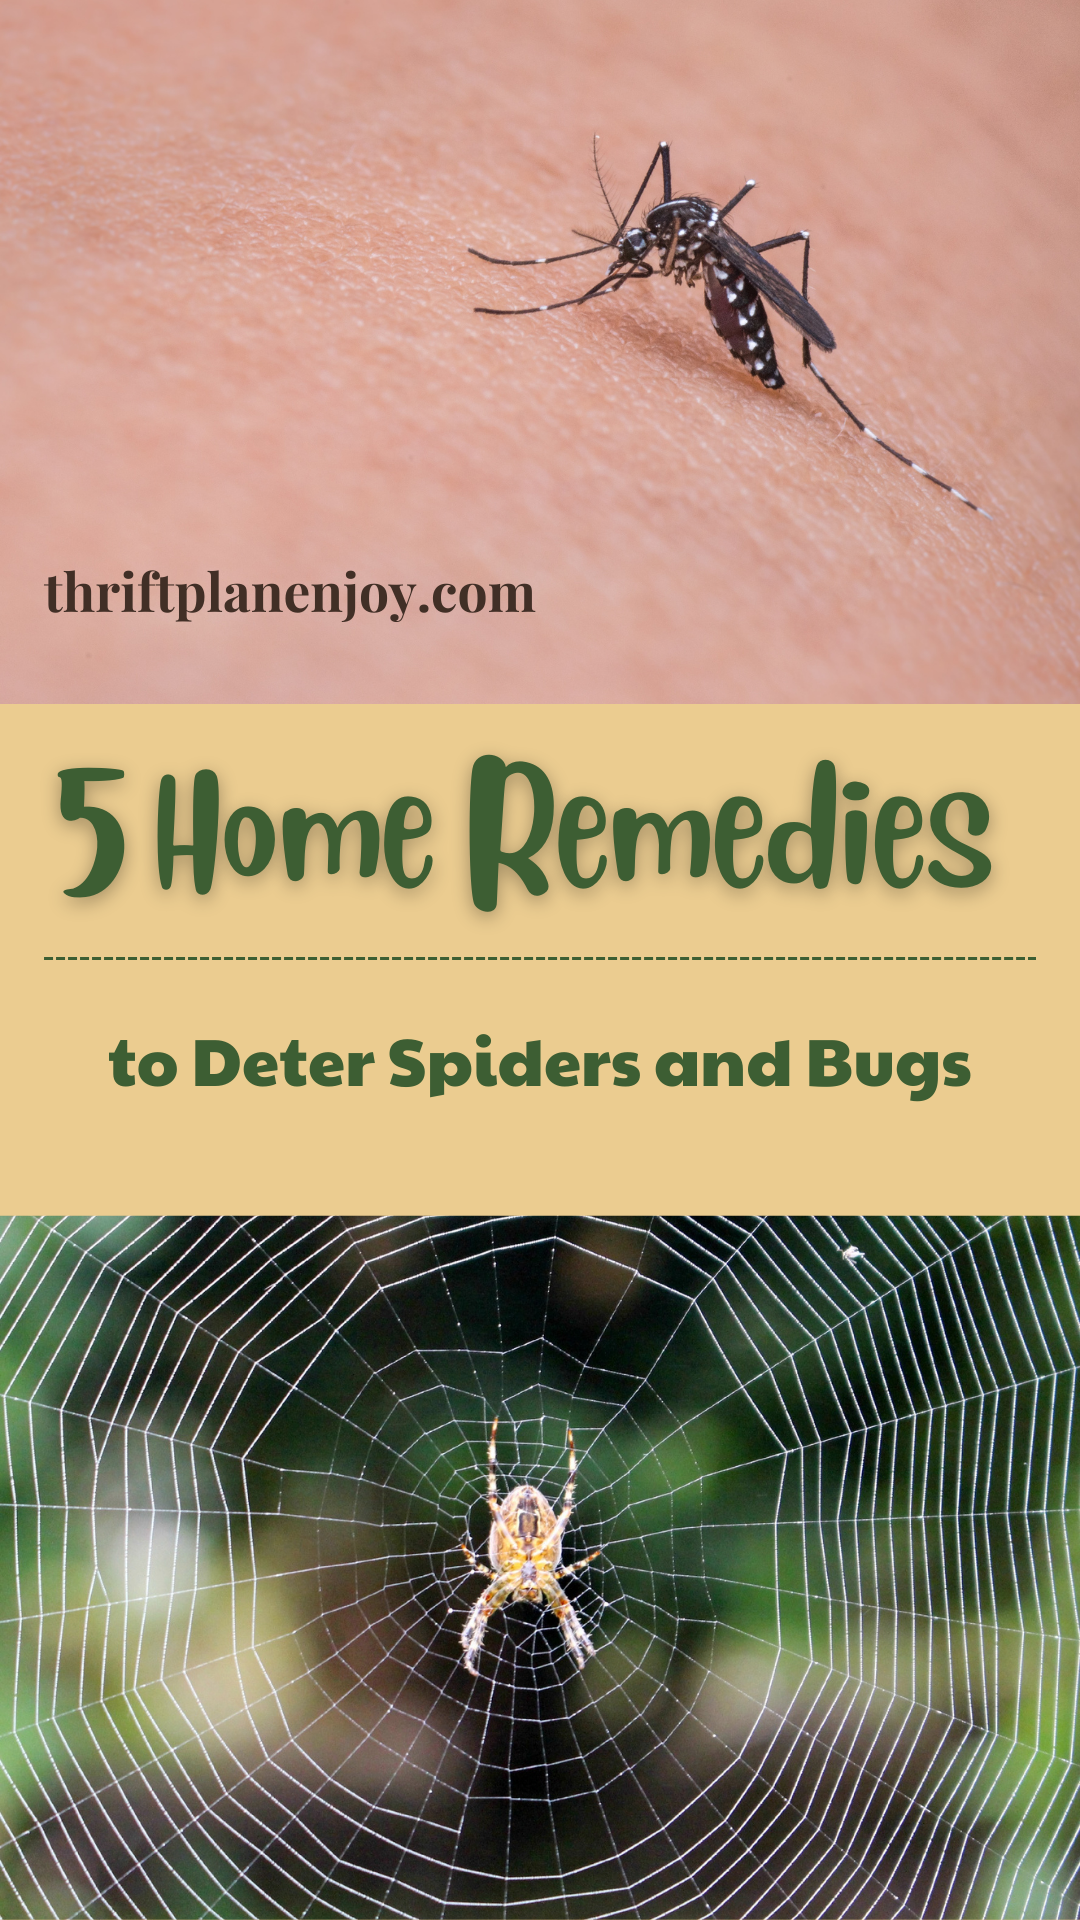 5 Home Remedies to Deter Spiders and Bugs